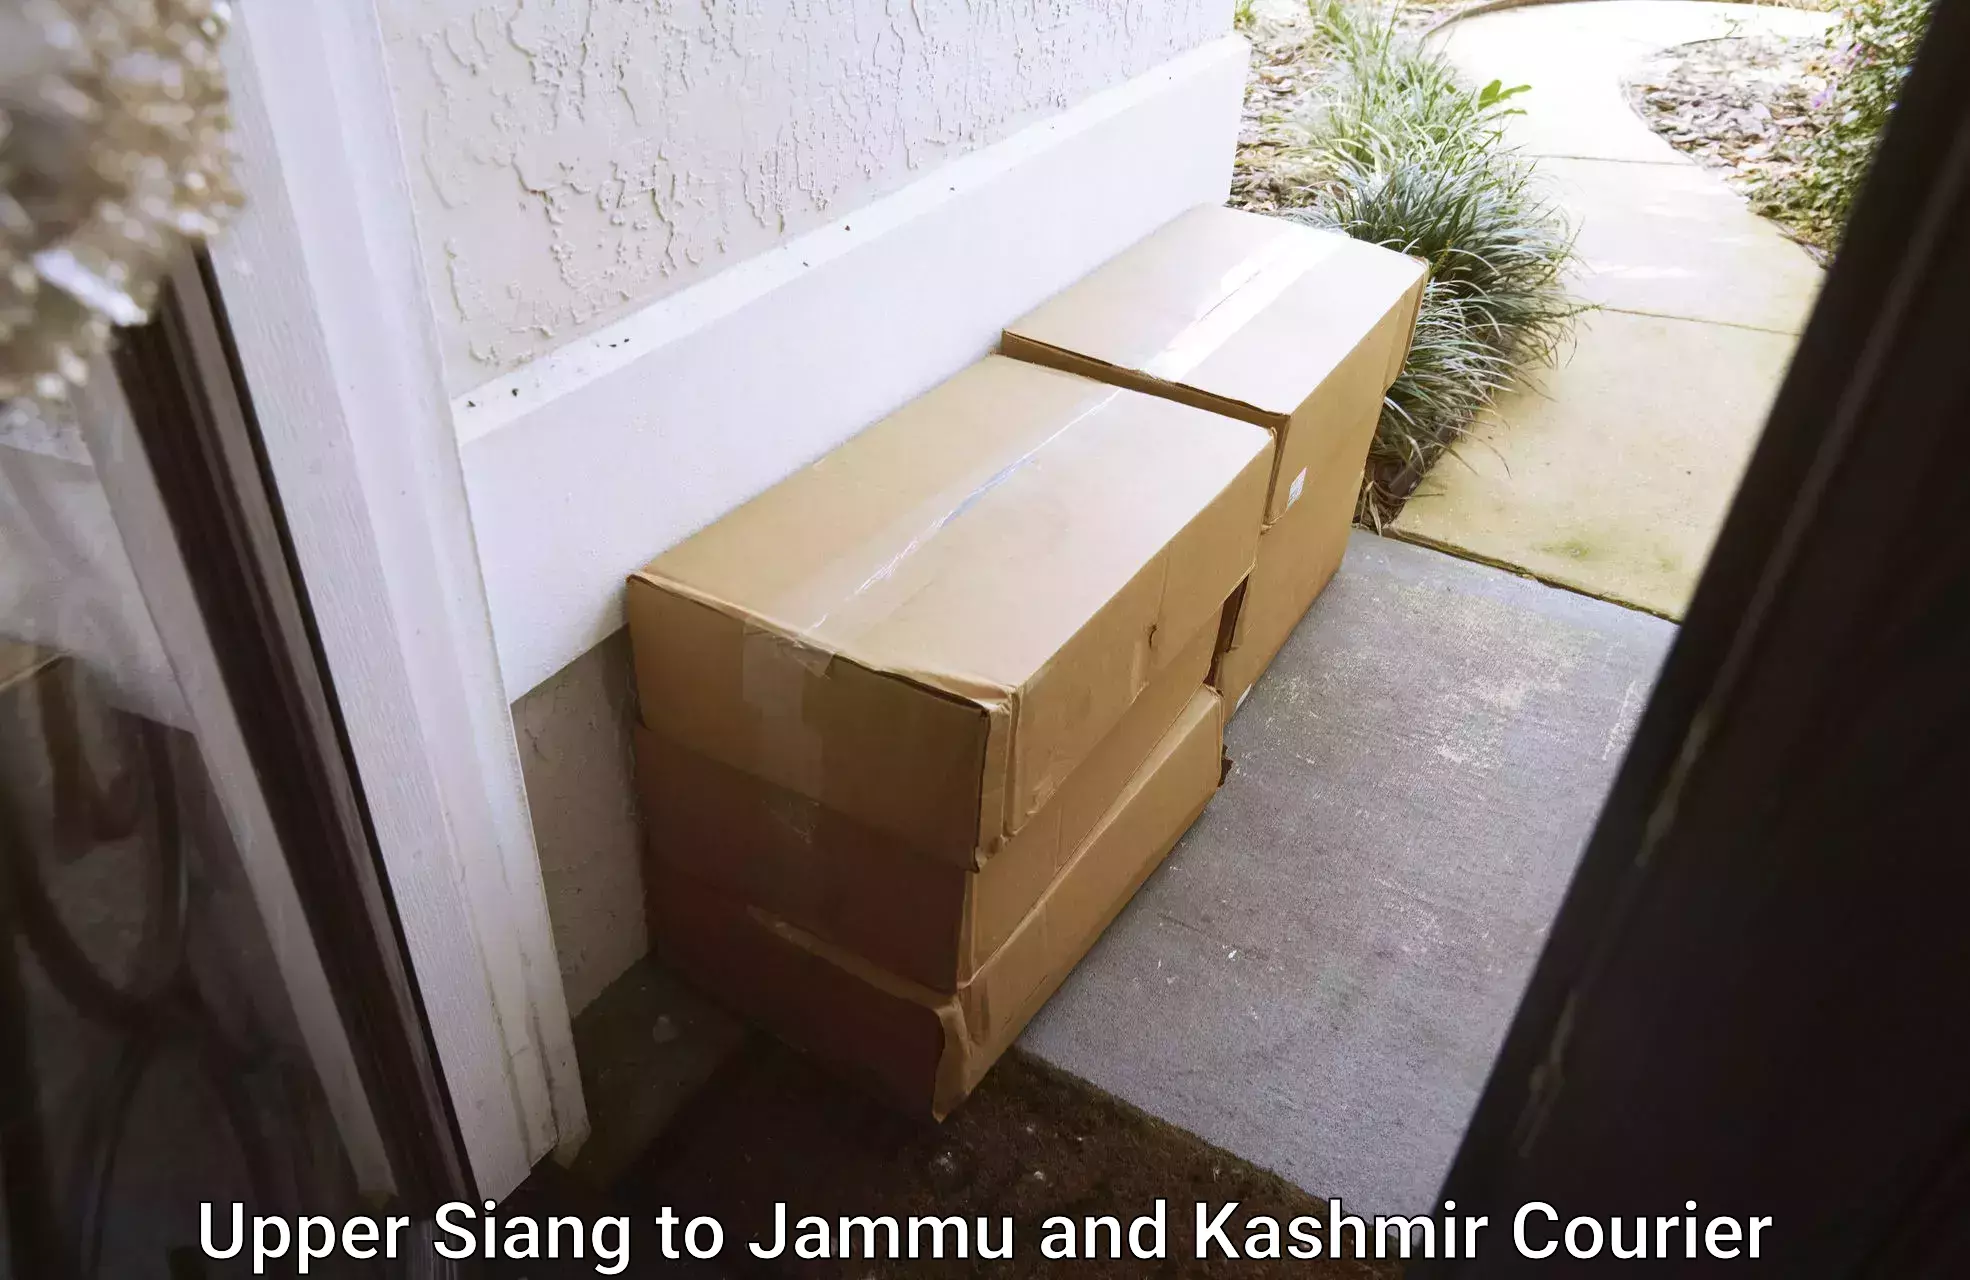 Express logistics providers Upper Siang to Jammu and Kashmir